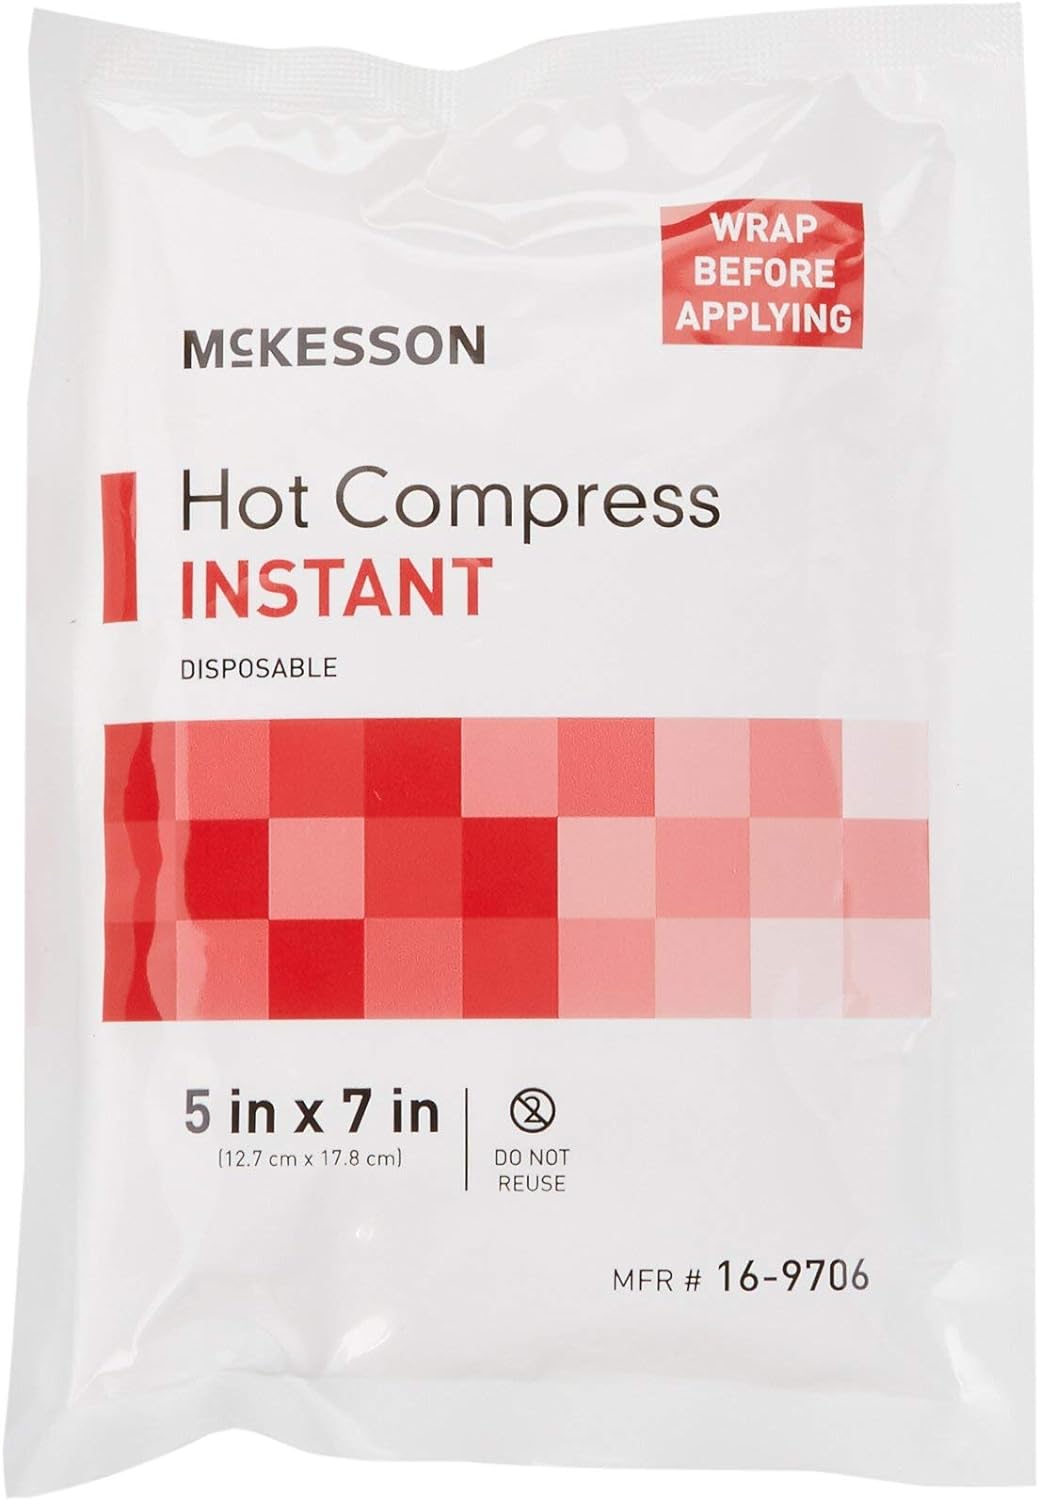 McKesson Hot Compress, Instant Hot Pack, Disposable, 5 in x 7 in, 1 Co